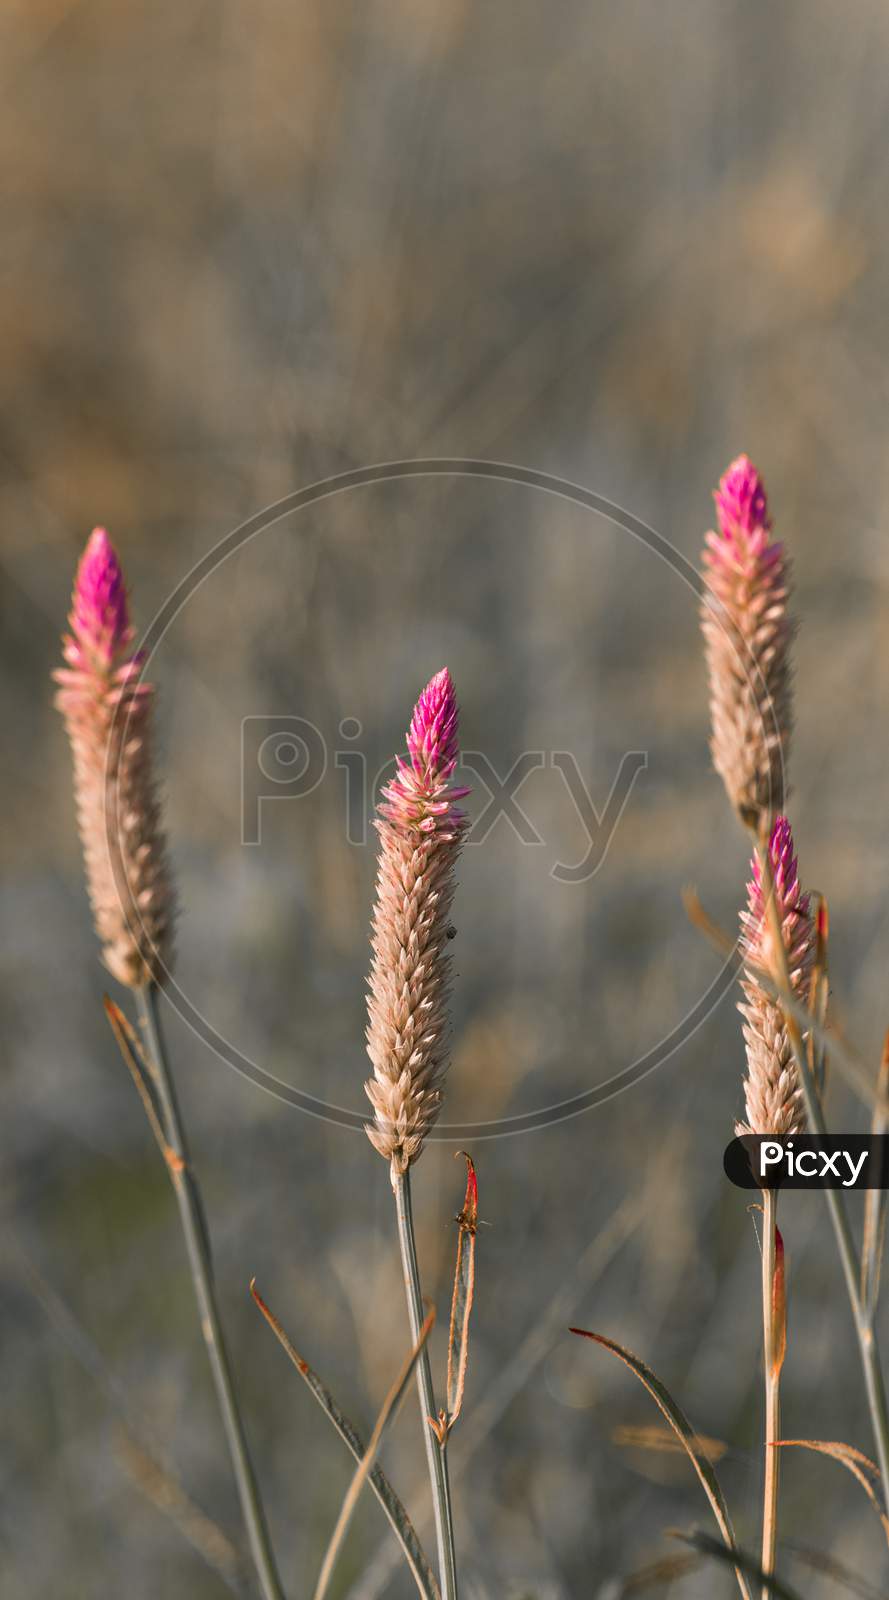 Many Of Cock'S Comb Flowers Against The Soft Background, Close Up Detailed Photograph Of The Beautiful Nature, Early Morning Light Hit And Glowing The Dew On The Flowers Create A Relaxing Meadow Mood.